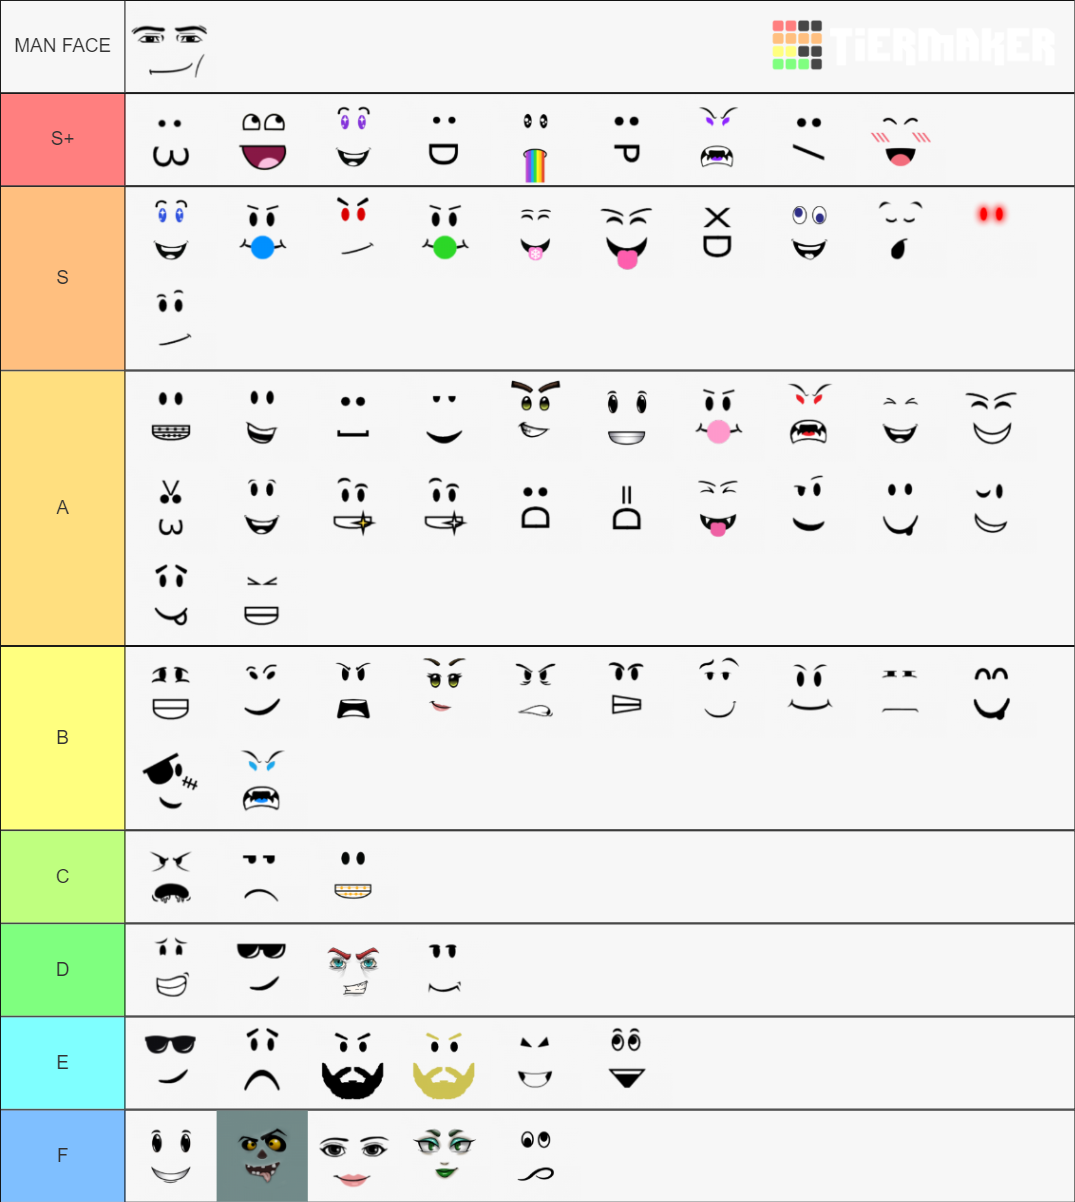 Most Popular Roblox Faces Tier List (Community Rankings) - TierMaker